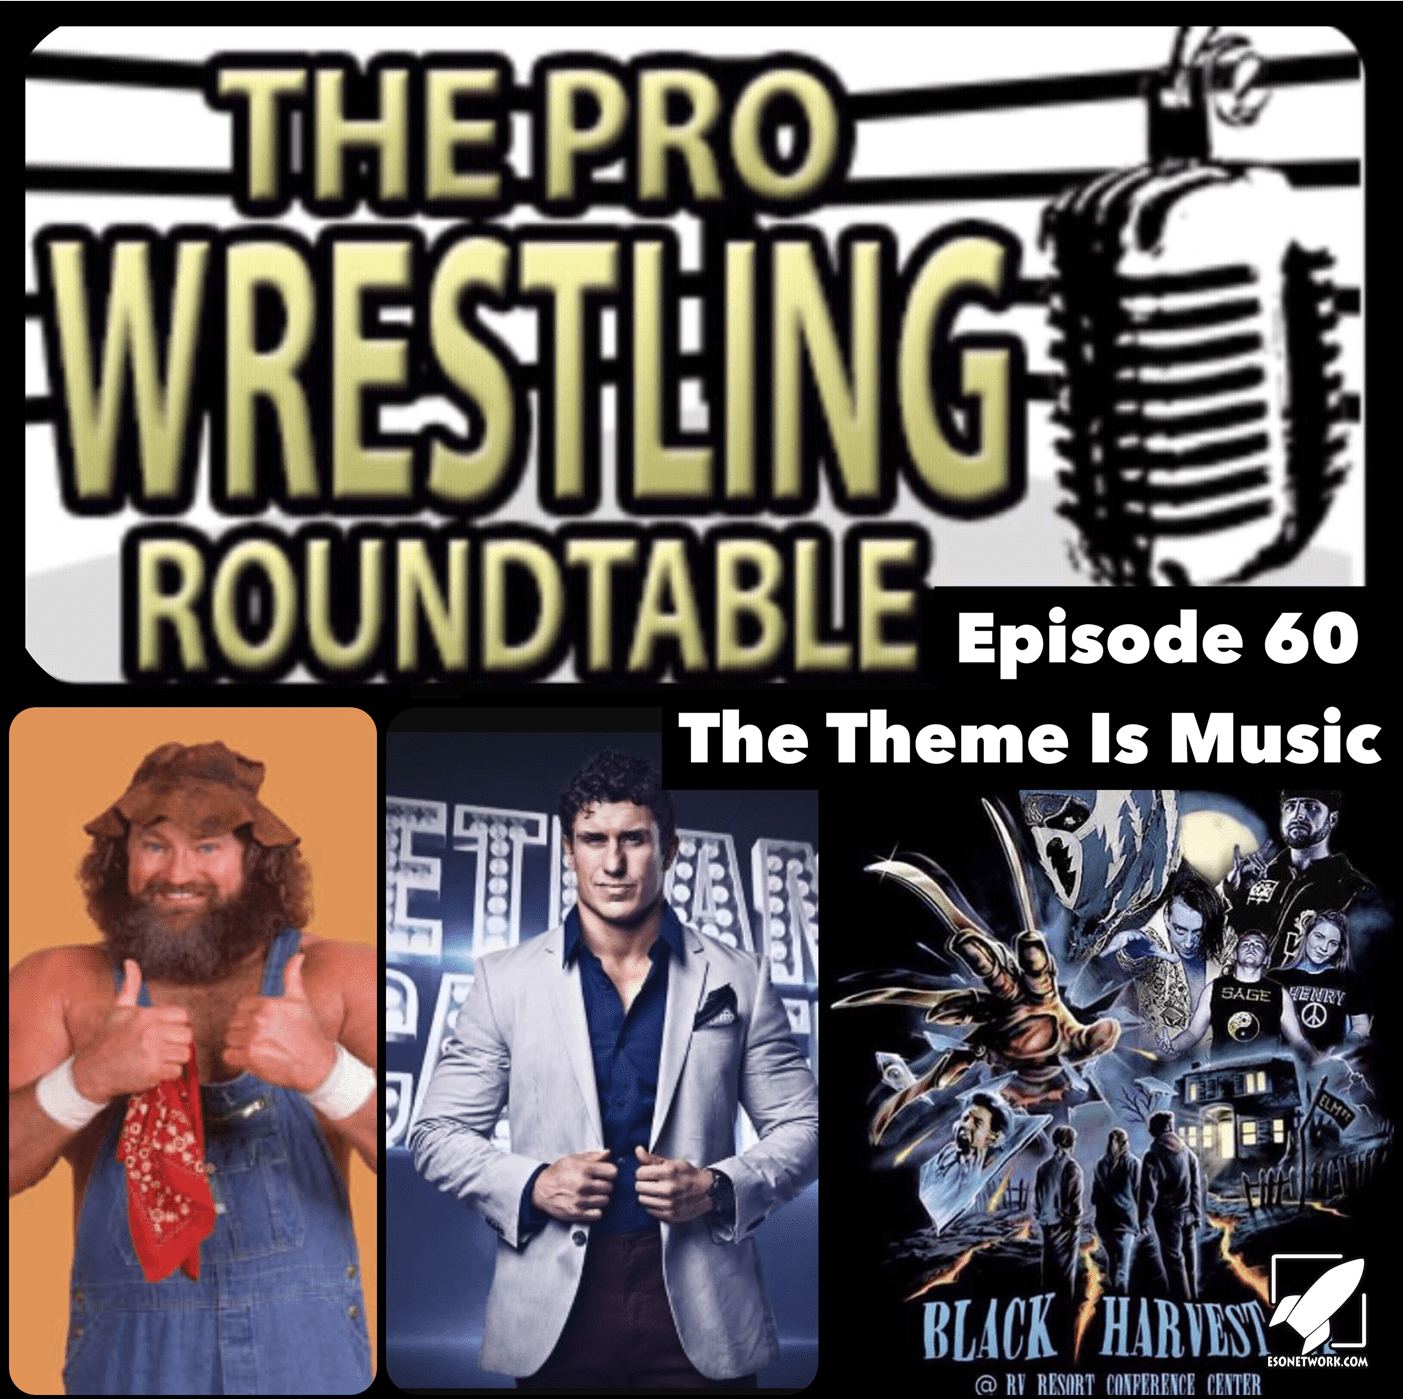 The Pro Wresting Roundtable Ep 60